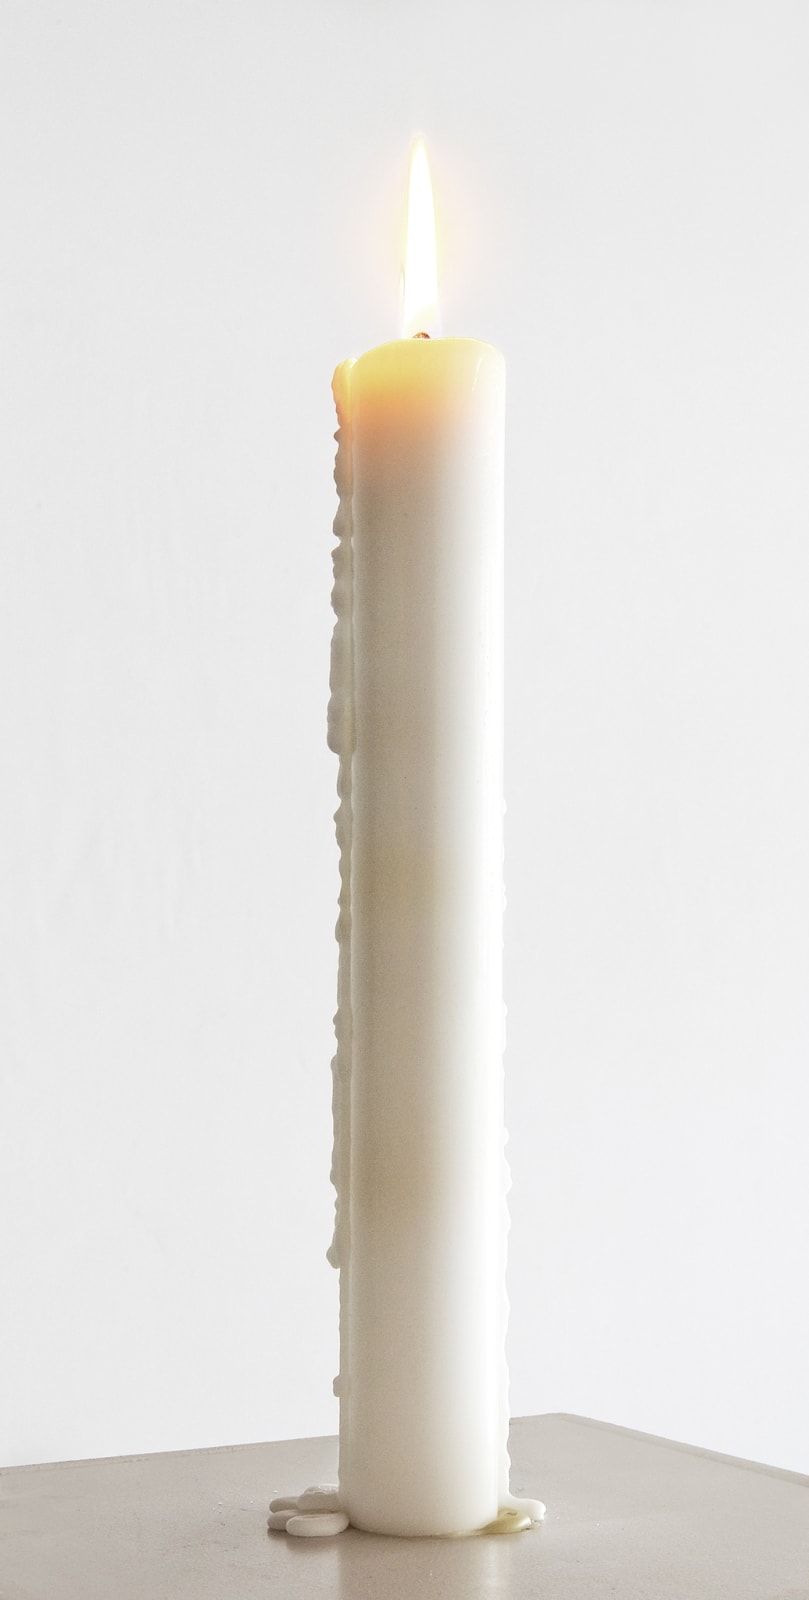 Katie Paterson Candle (from Earth into a Black Hole), 2015 Scented candle, 23 layers, Parafin wax, wick, fragrance edition of 45 plus 2 AP This edition 16/45 29 x 3 x 3 cm (candle) 38.2 x 20.7 x 5.2 cm (Boxed)